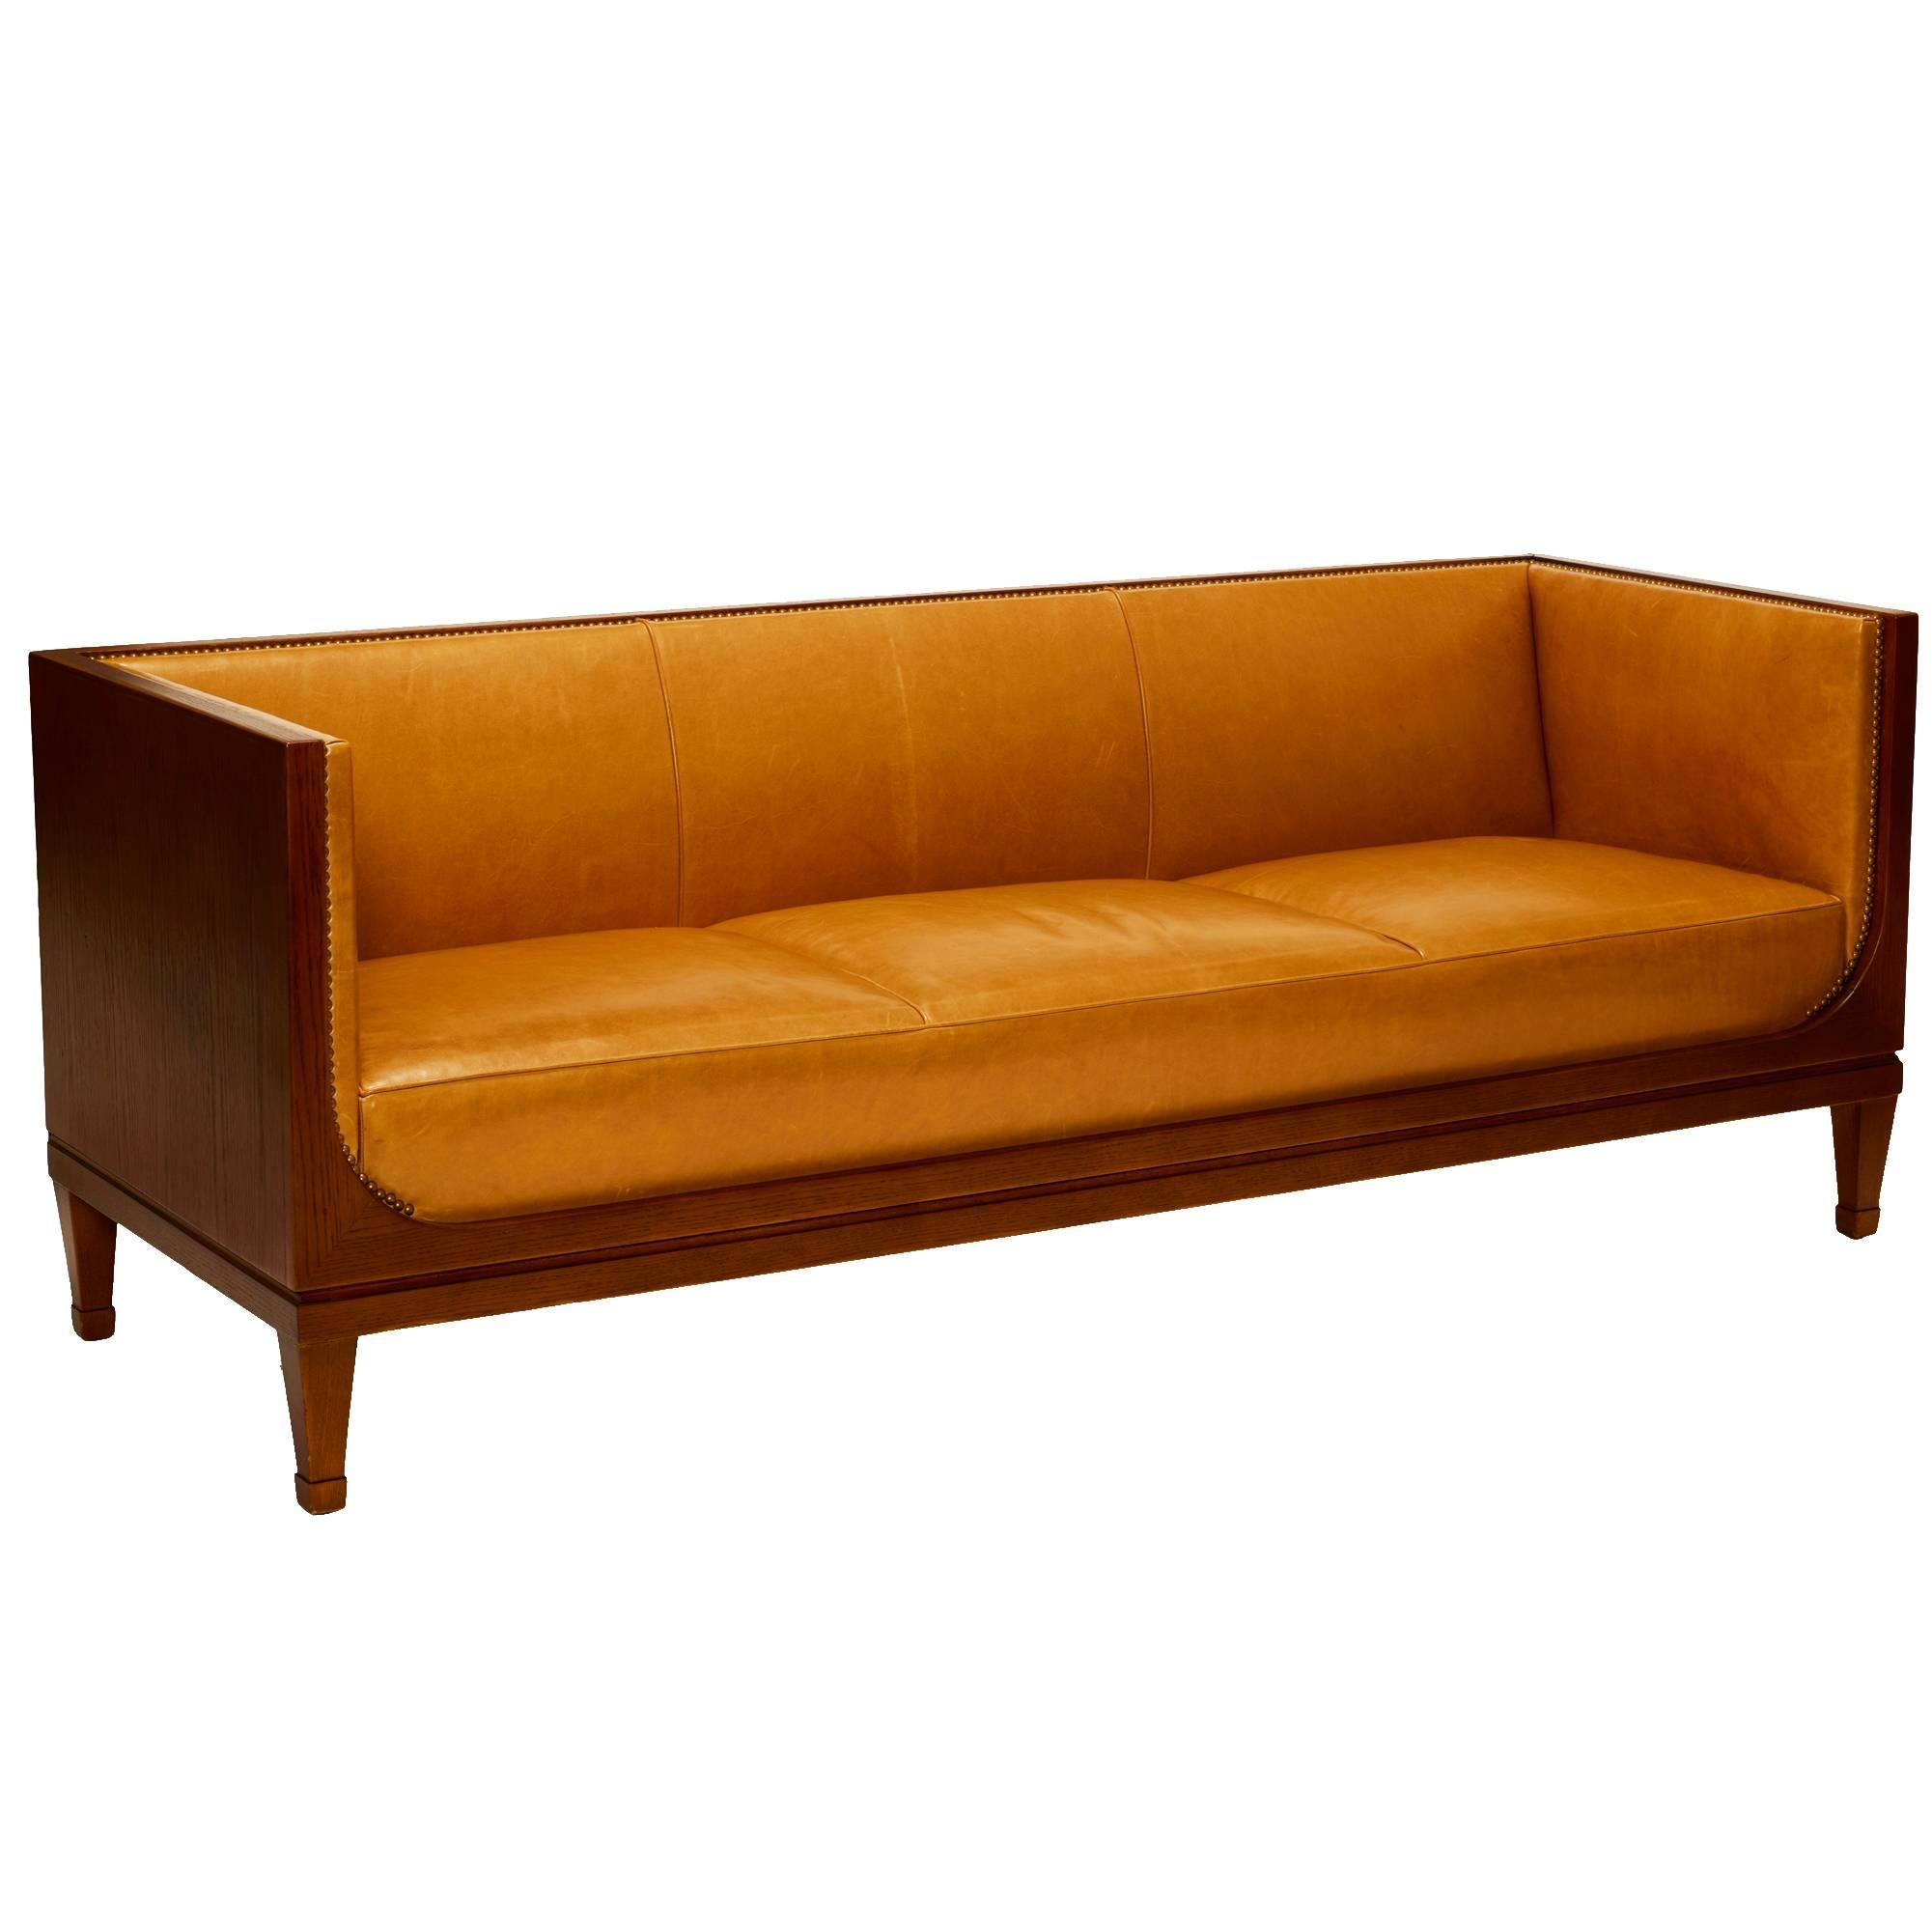 Elegant Sofa with Oak Frame and Leather Upholstery by Frits Henningsen For Sale